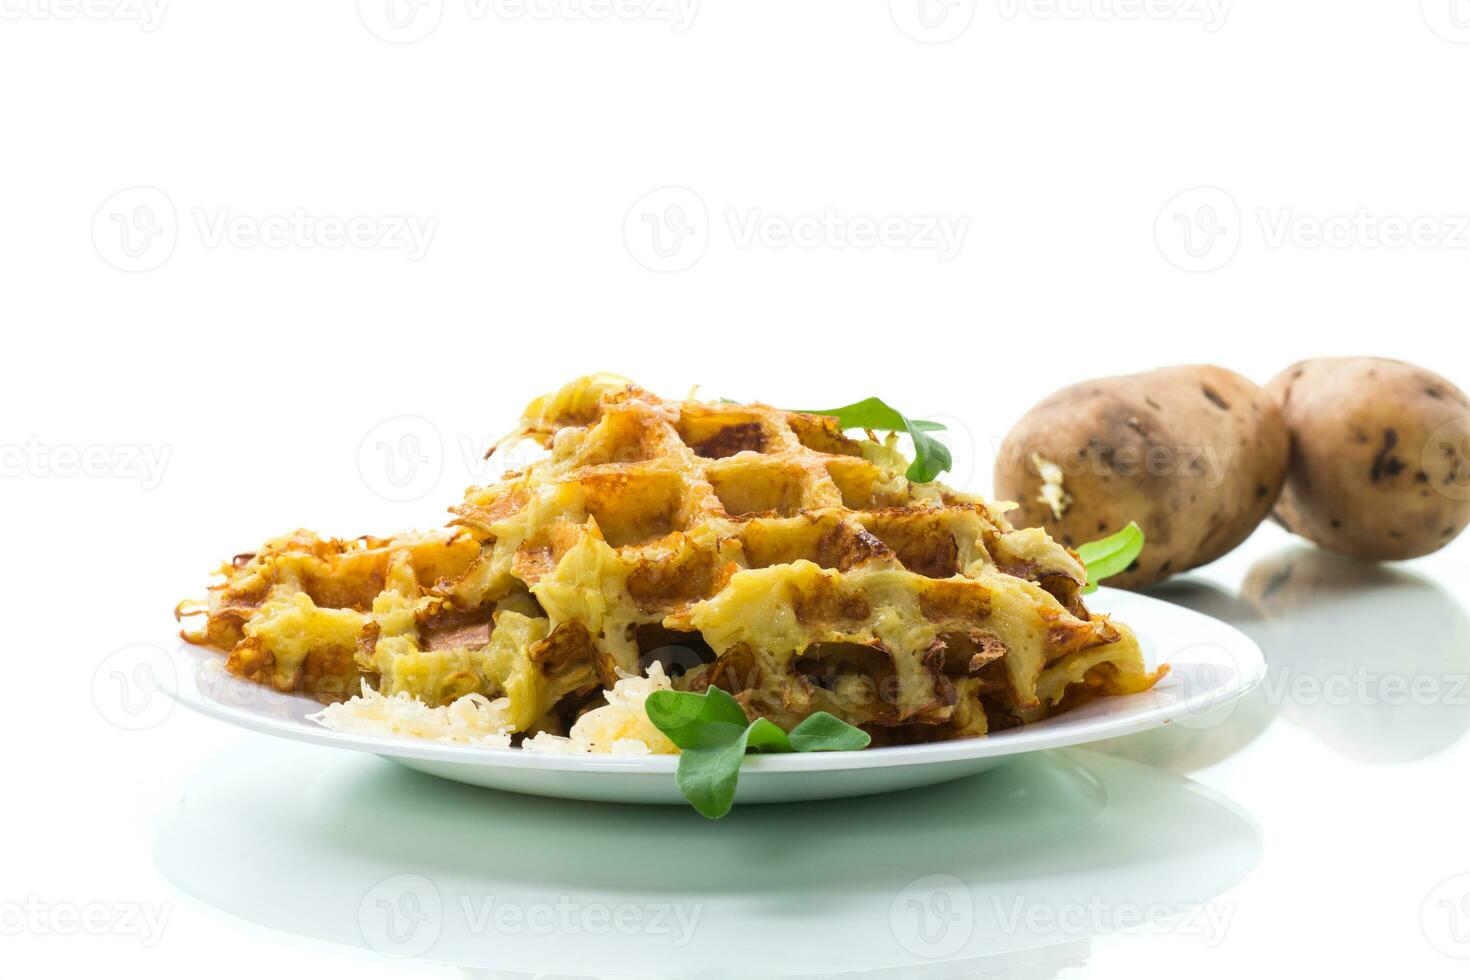 fried potato waffles with cheese in a plate on white background photo